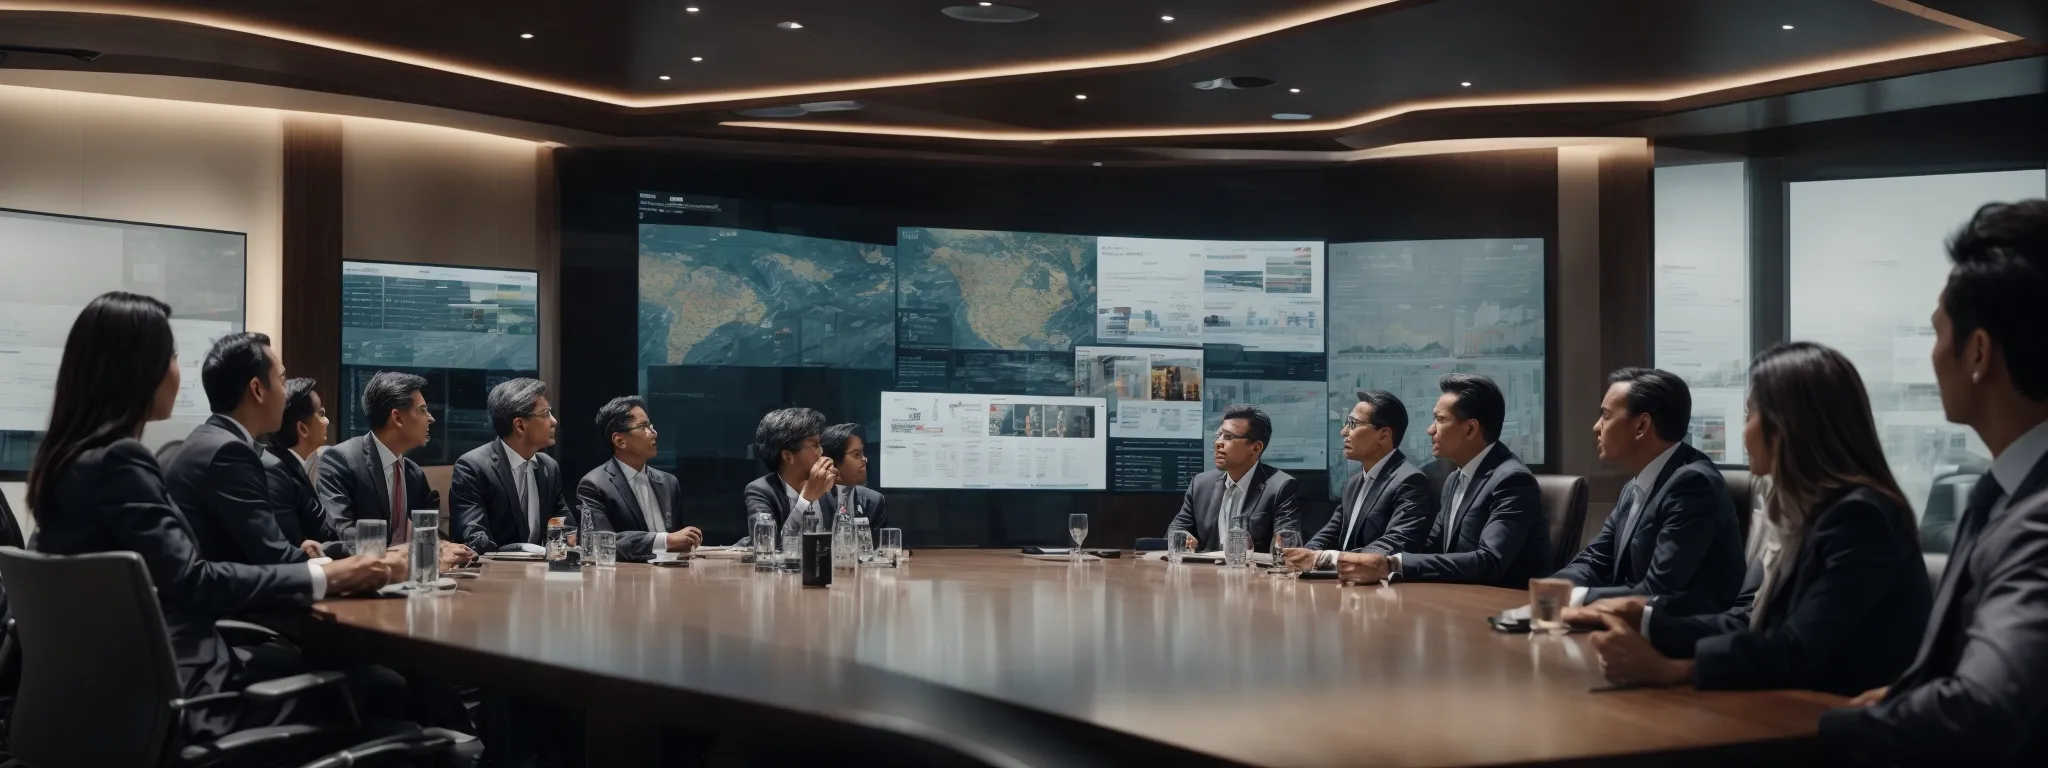 a dynamic boardroom meeting with enterprise leaders discussing digital strategies using a large screen displaying web analytics and seo metrics.